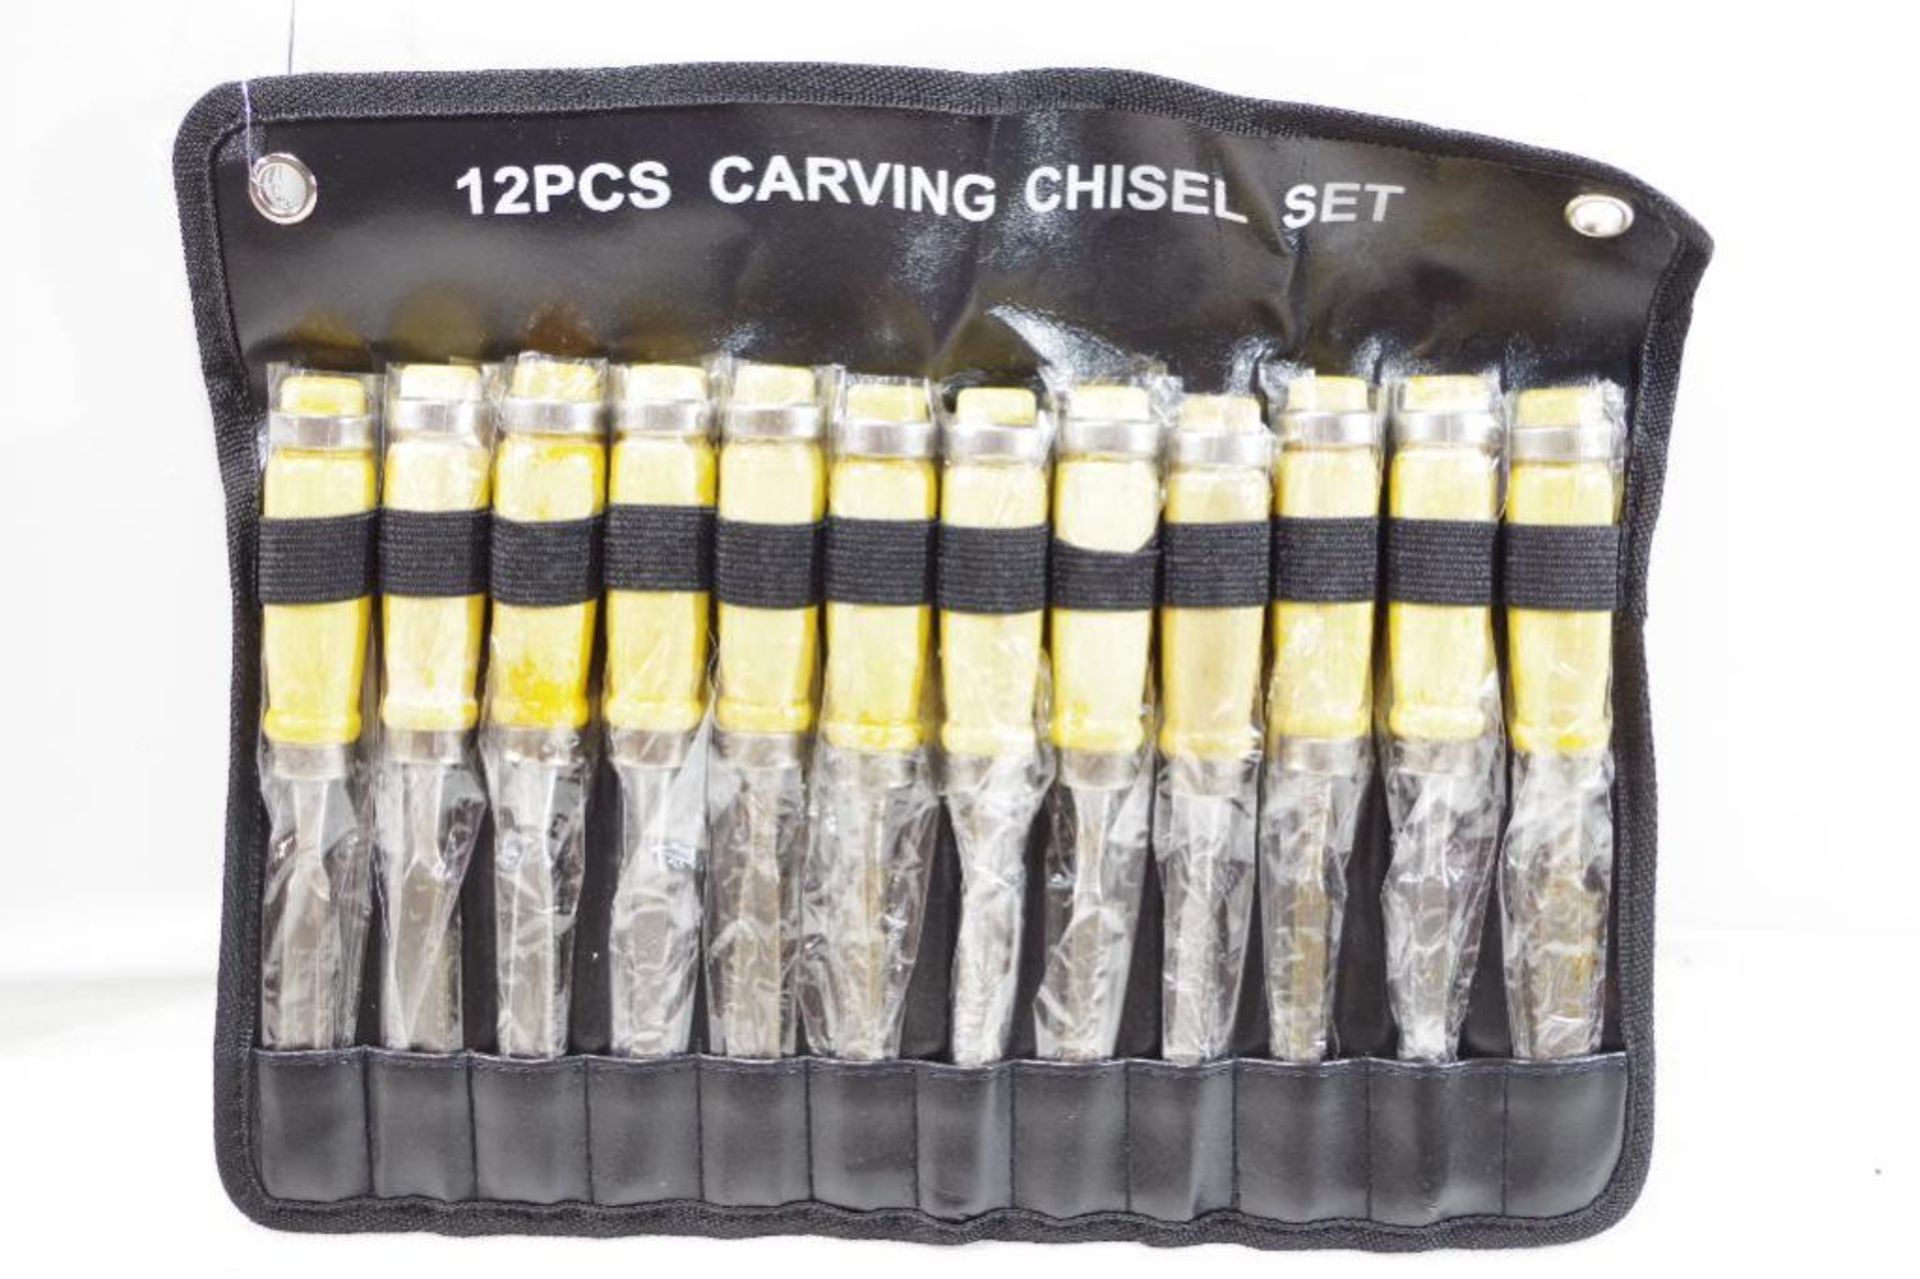 NEW 12-Piece Wood Carving Hand Chisel Tools Set - Image 4 of 4